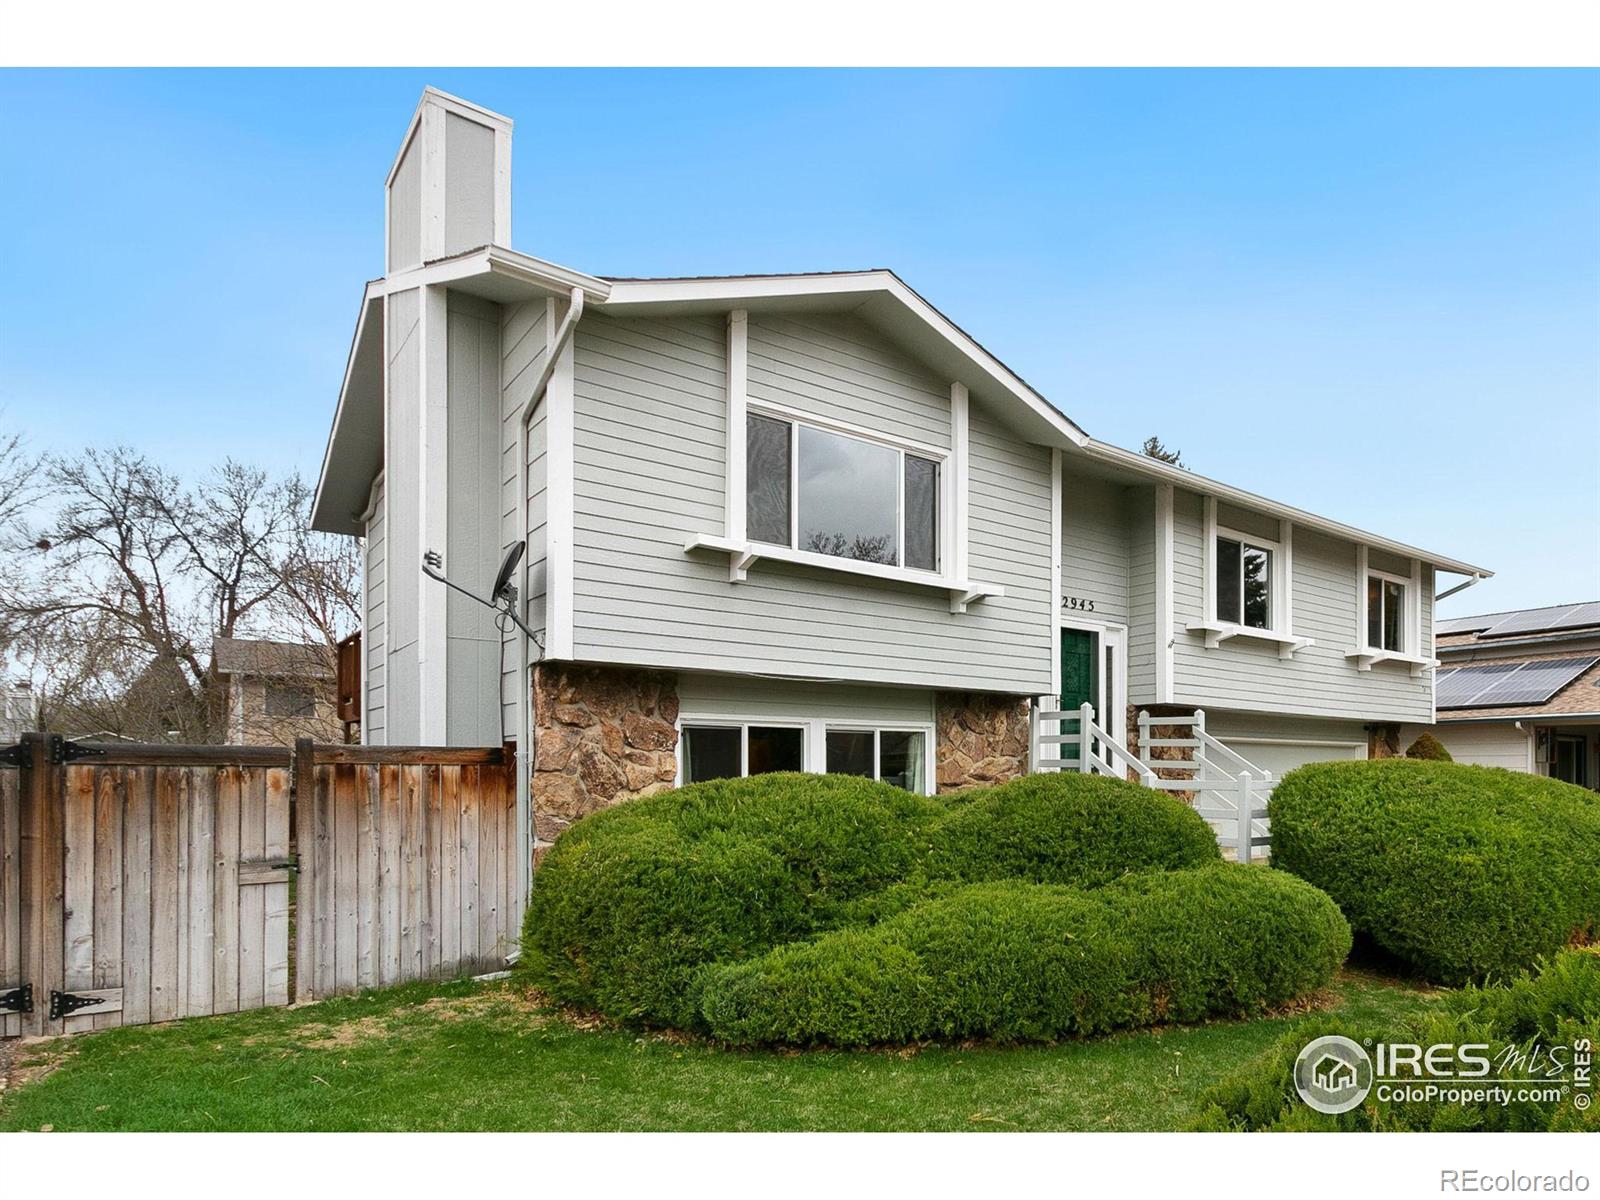 Report Image for 2945  Brookwood Place,Fort Collins, Colorado